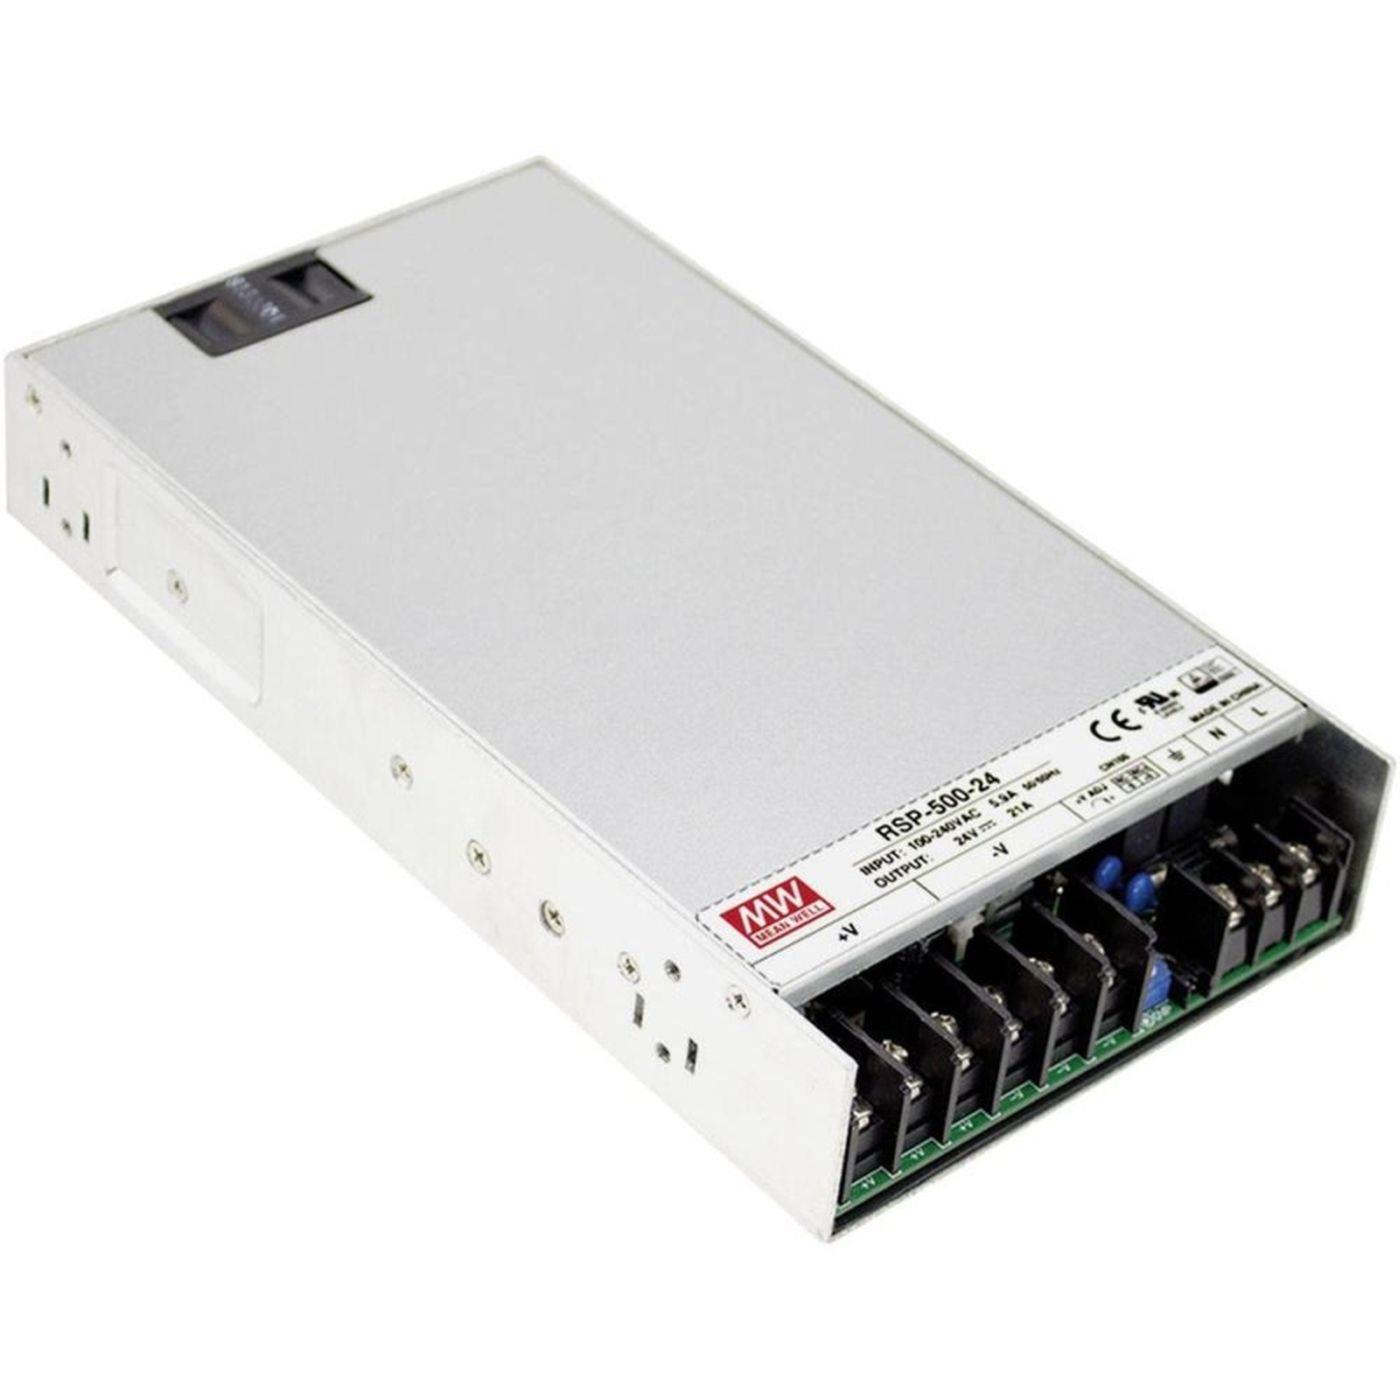 RSP-500-5 360W 5V 90A Industrial power supply